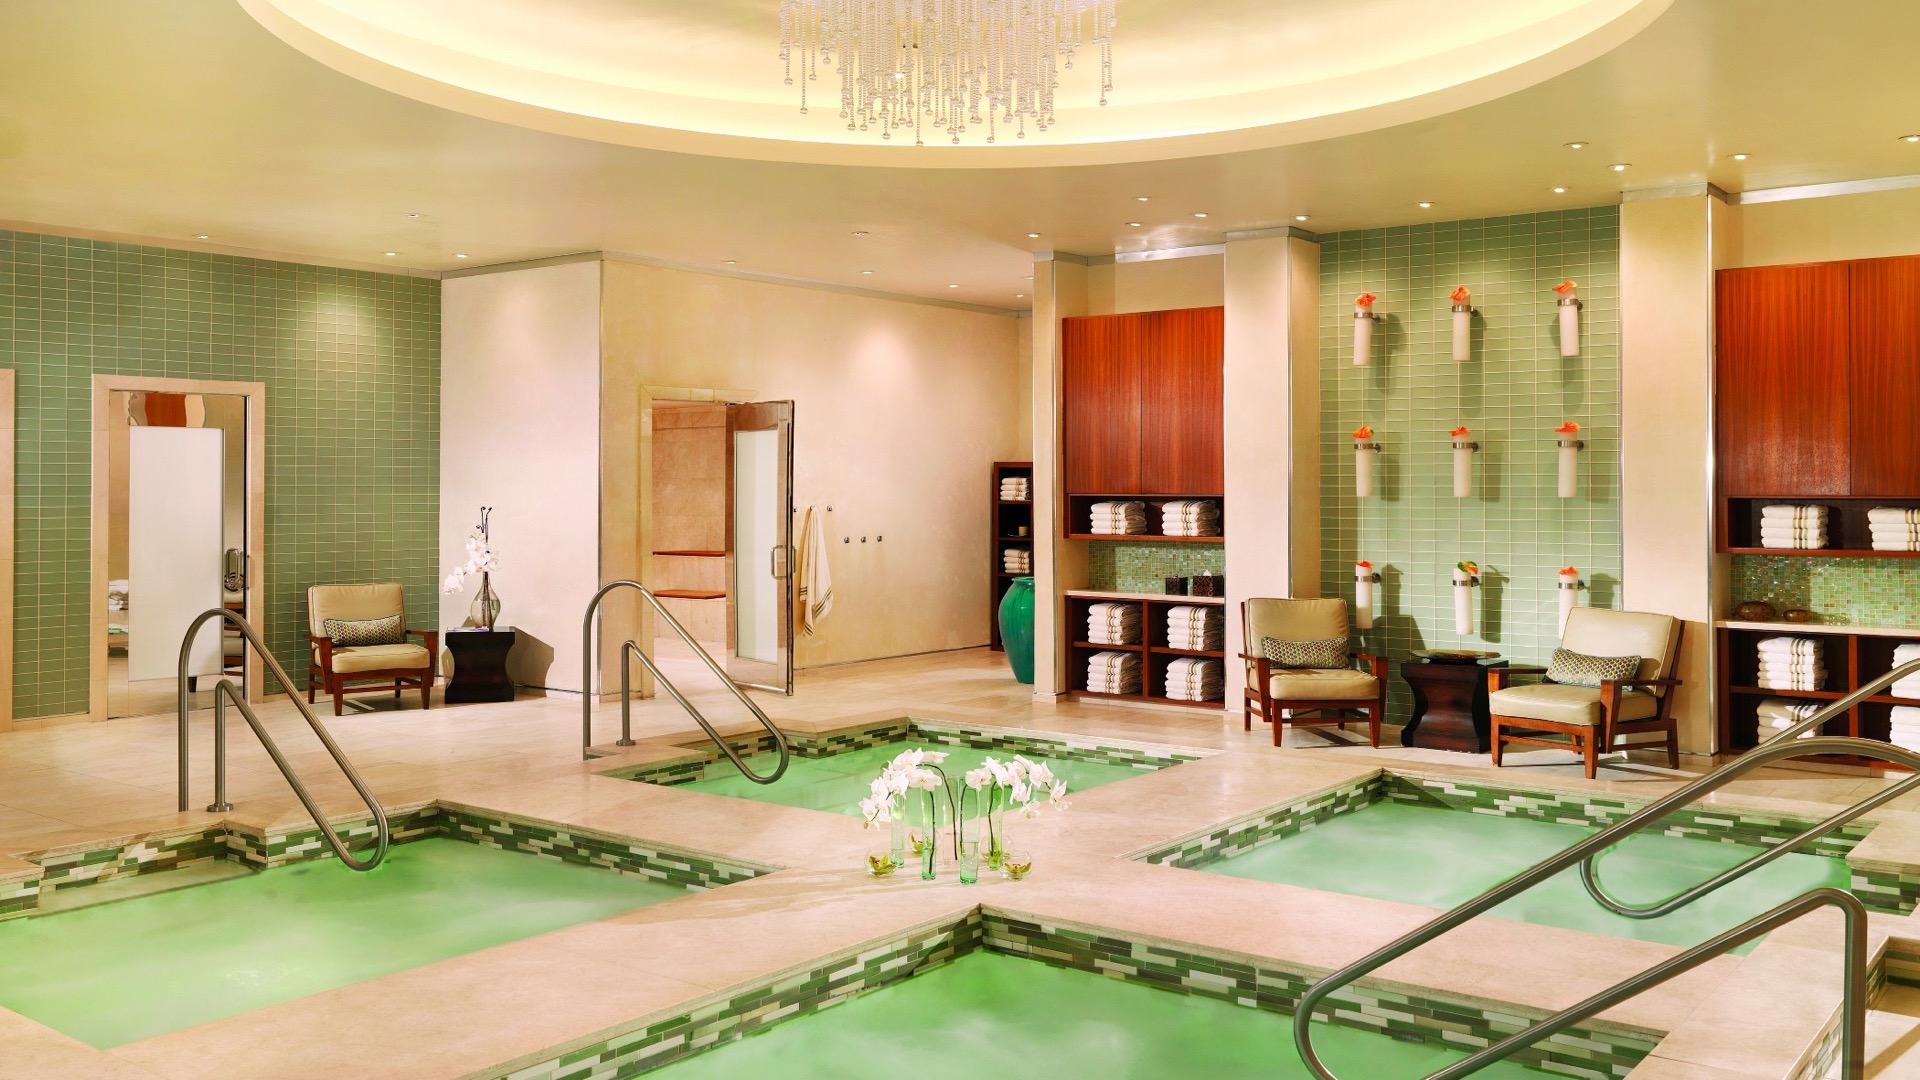 Step into a refreshingly creative sanctuary at Las Vegas' Spa Bell...